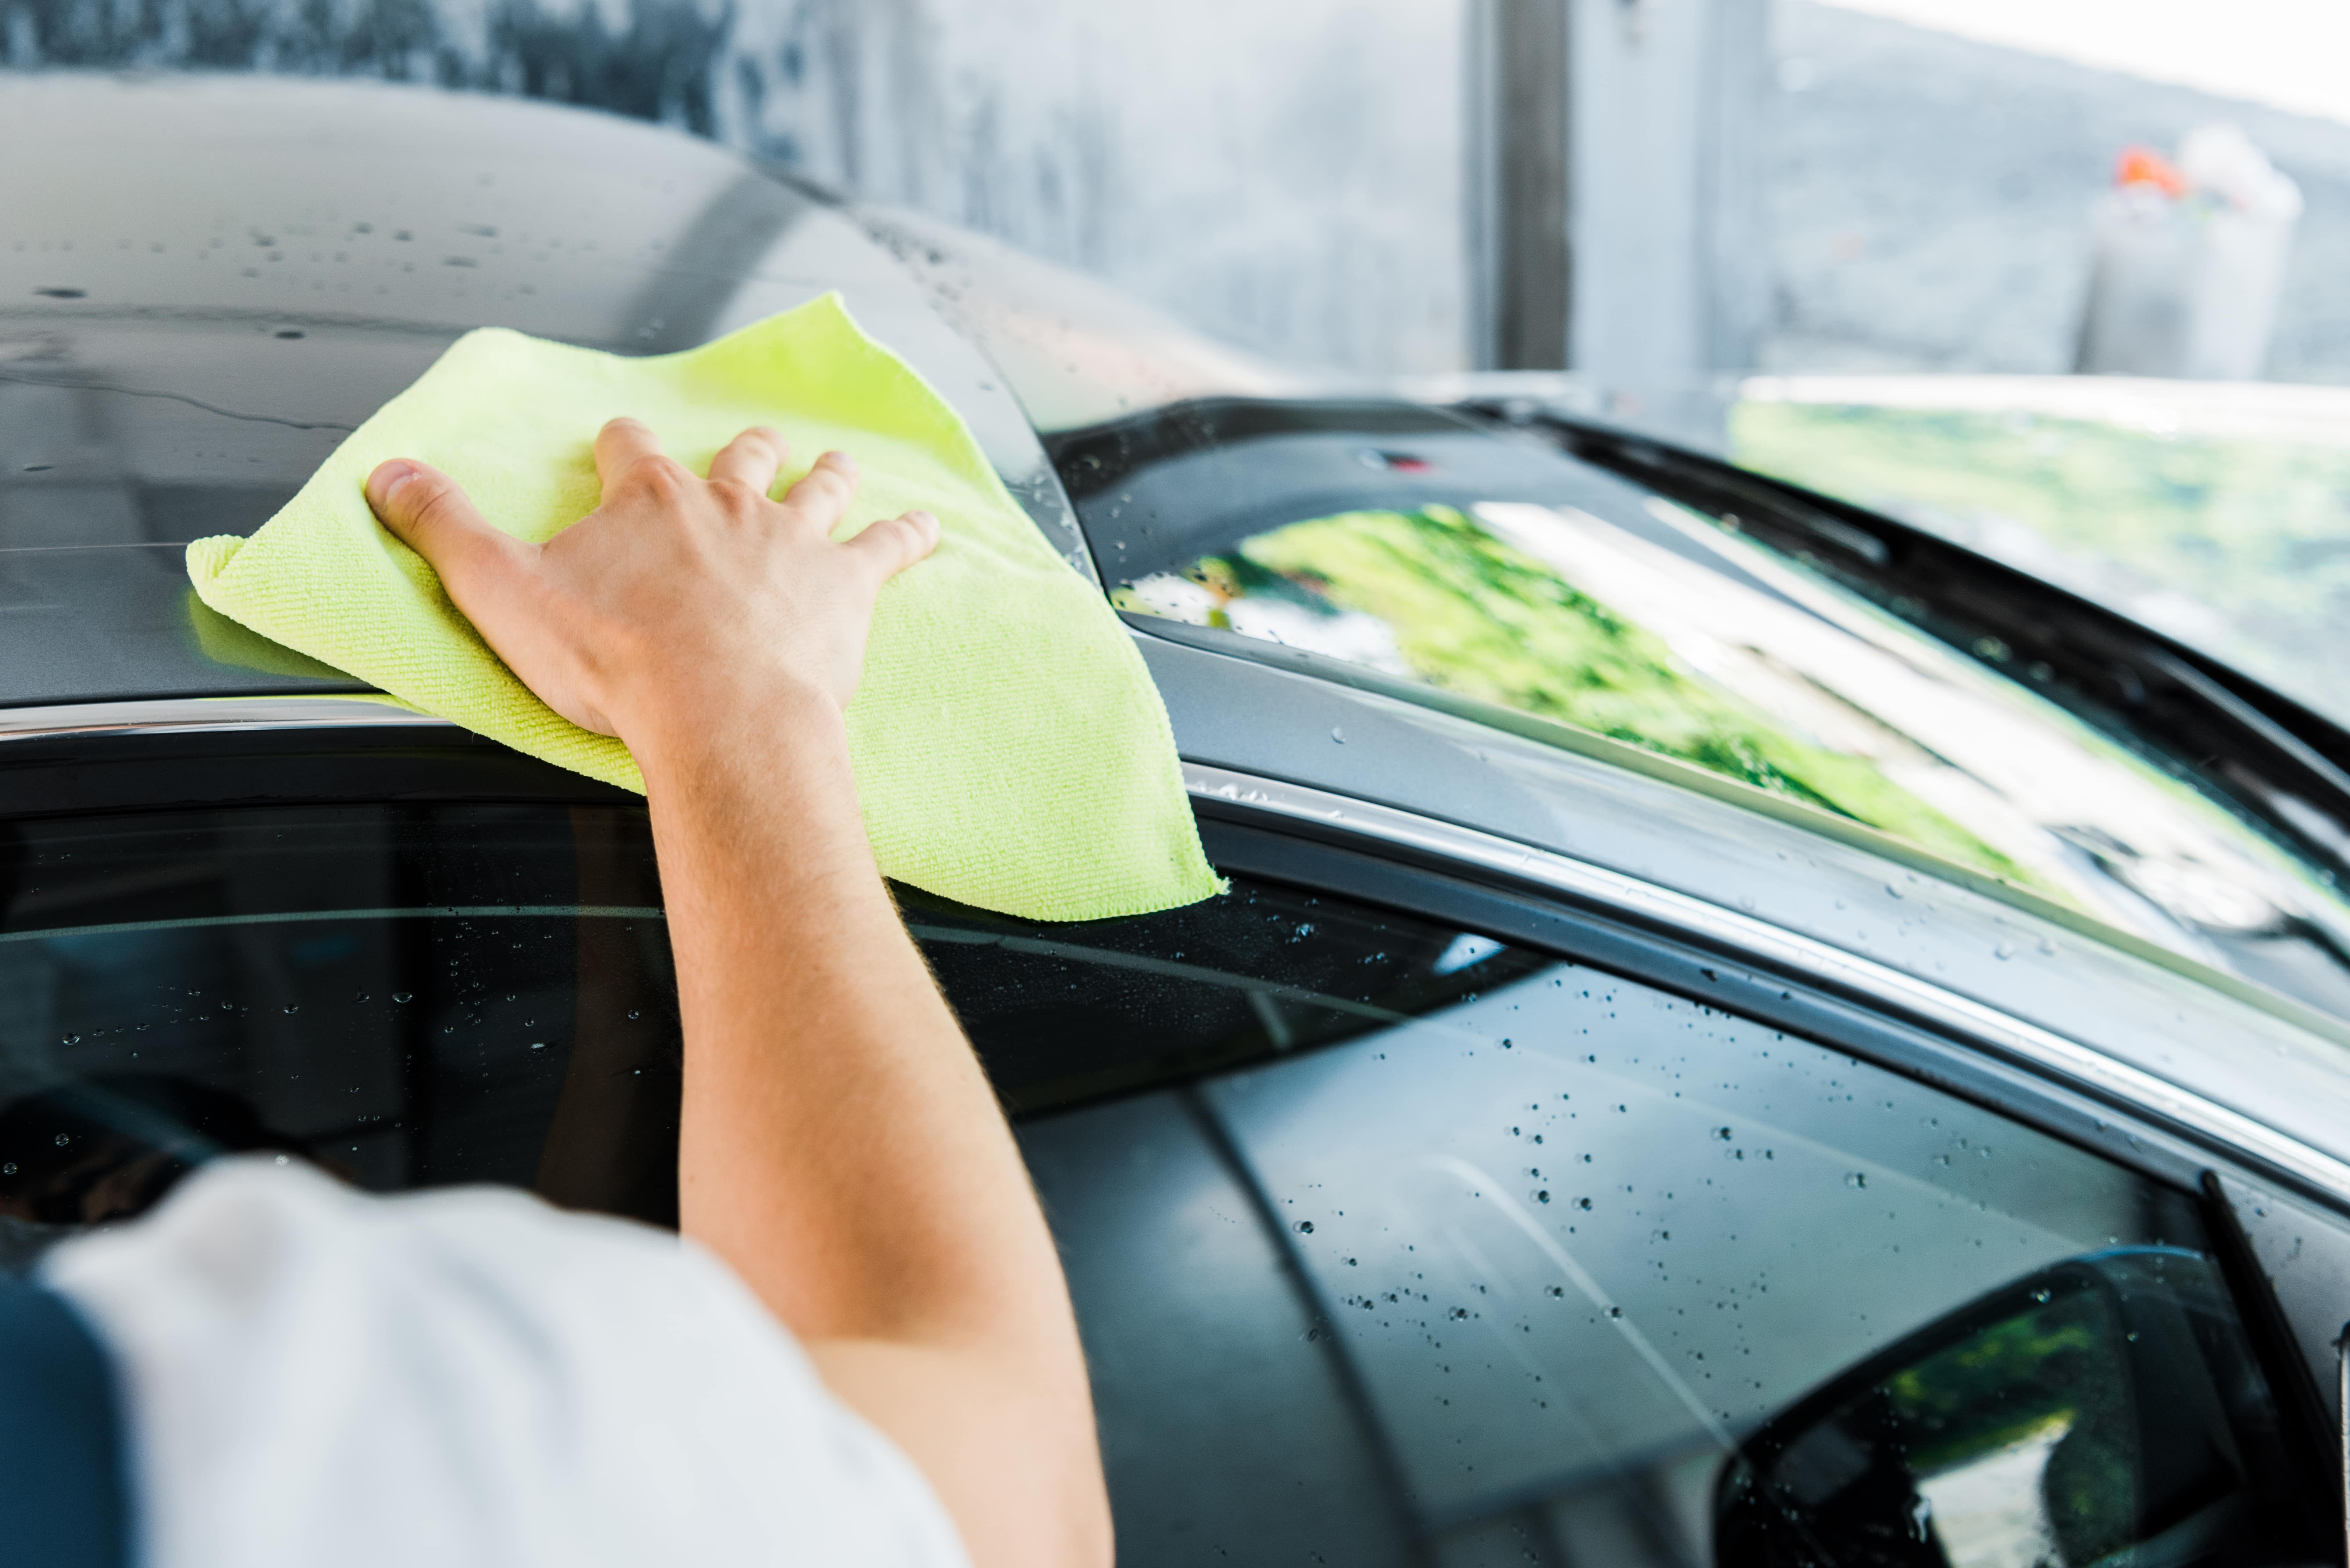 Eco-Friendly Cleaning Products For Your Car Wash